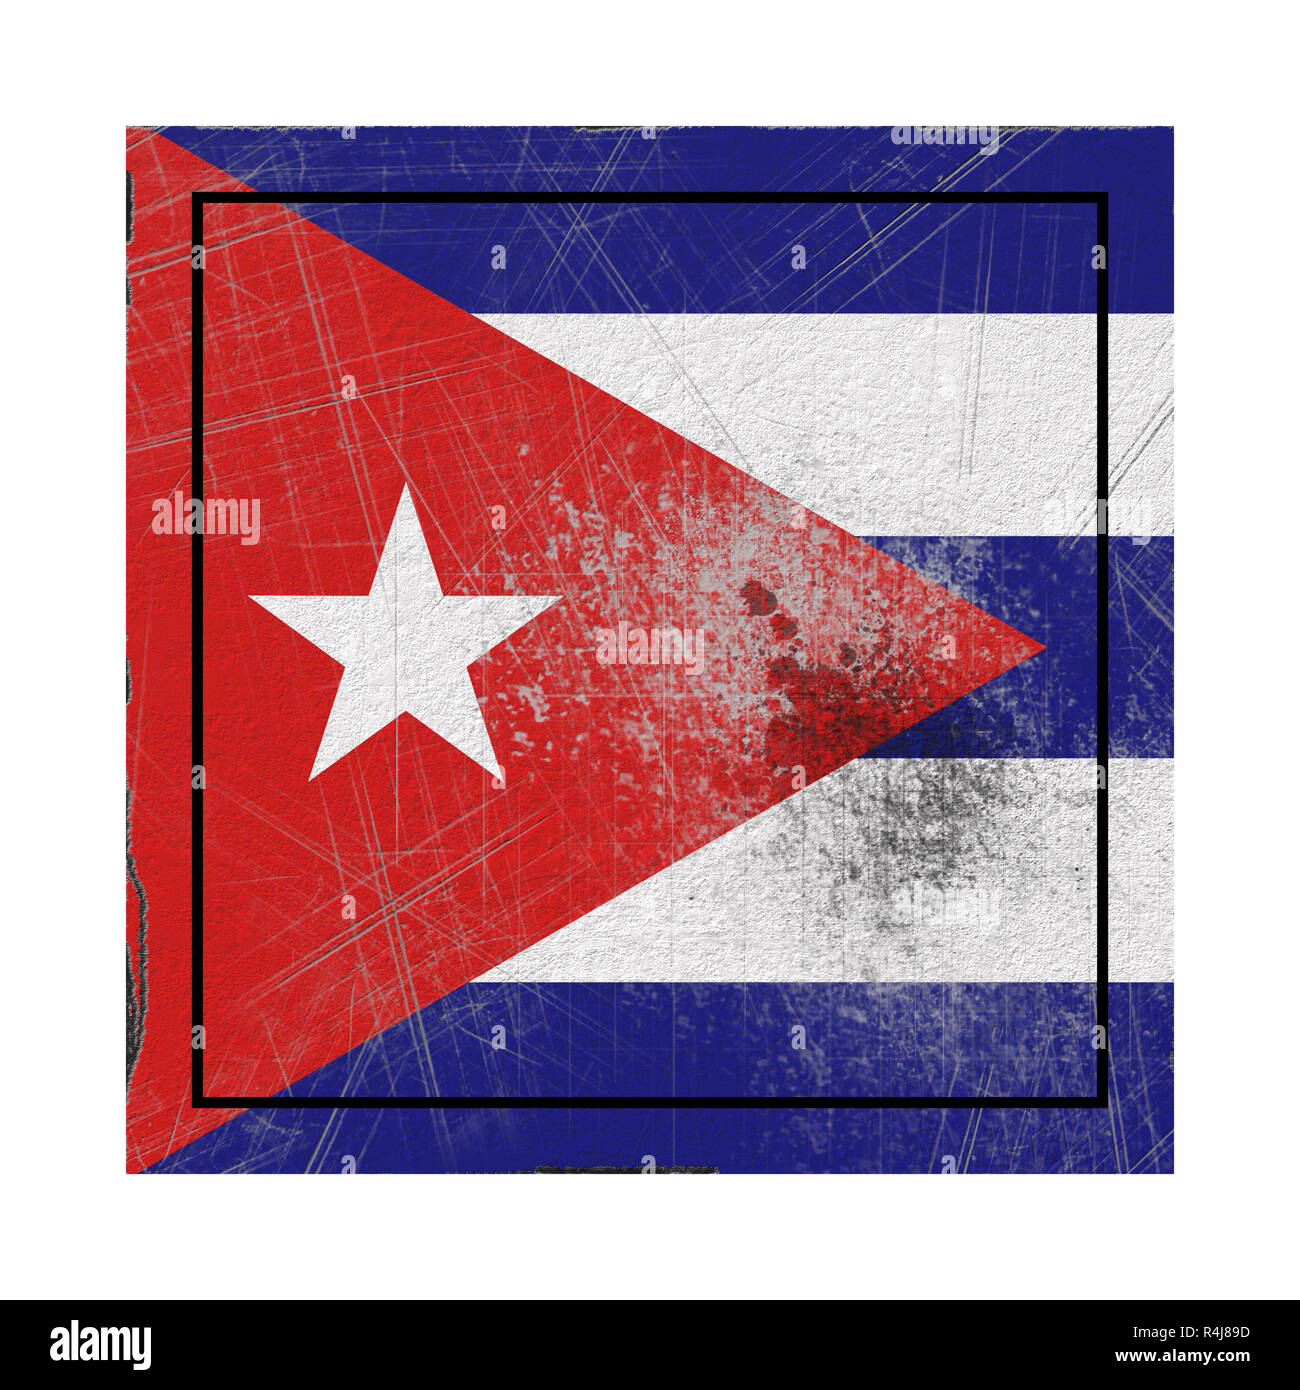 3d rendering of an old Cuba flag in a concrete square Stock Photo